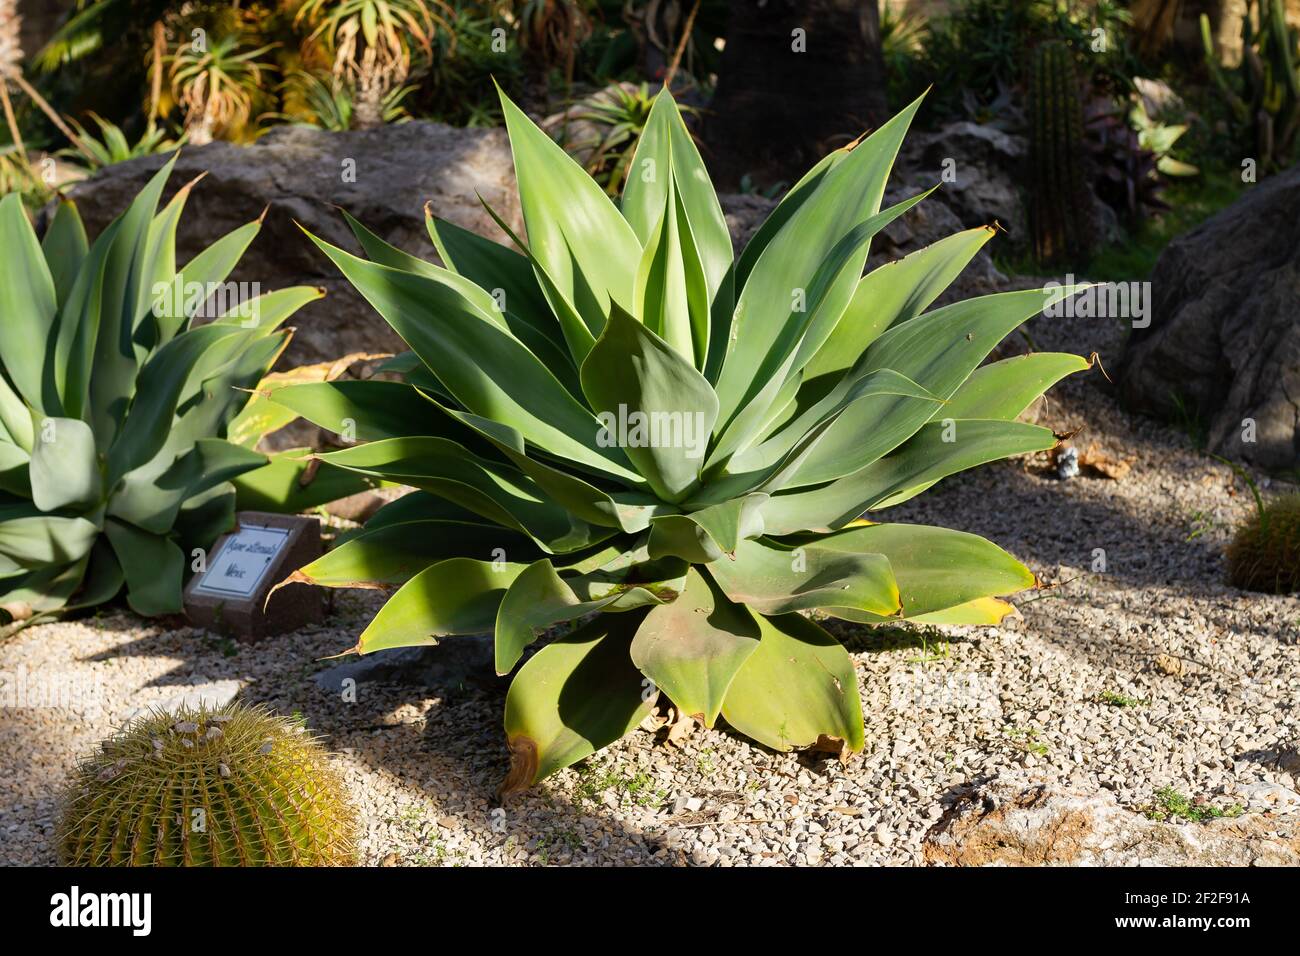 A closeup shot of Foxtail (Agave attenuata) plants and a cactus in the botanical garden Stock Photo